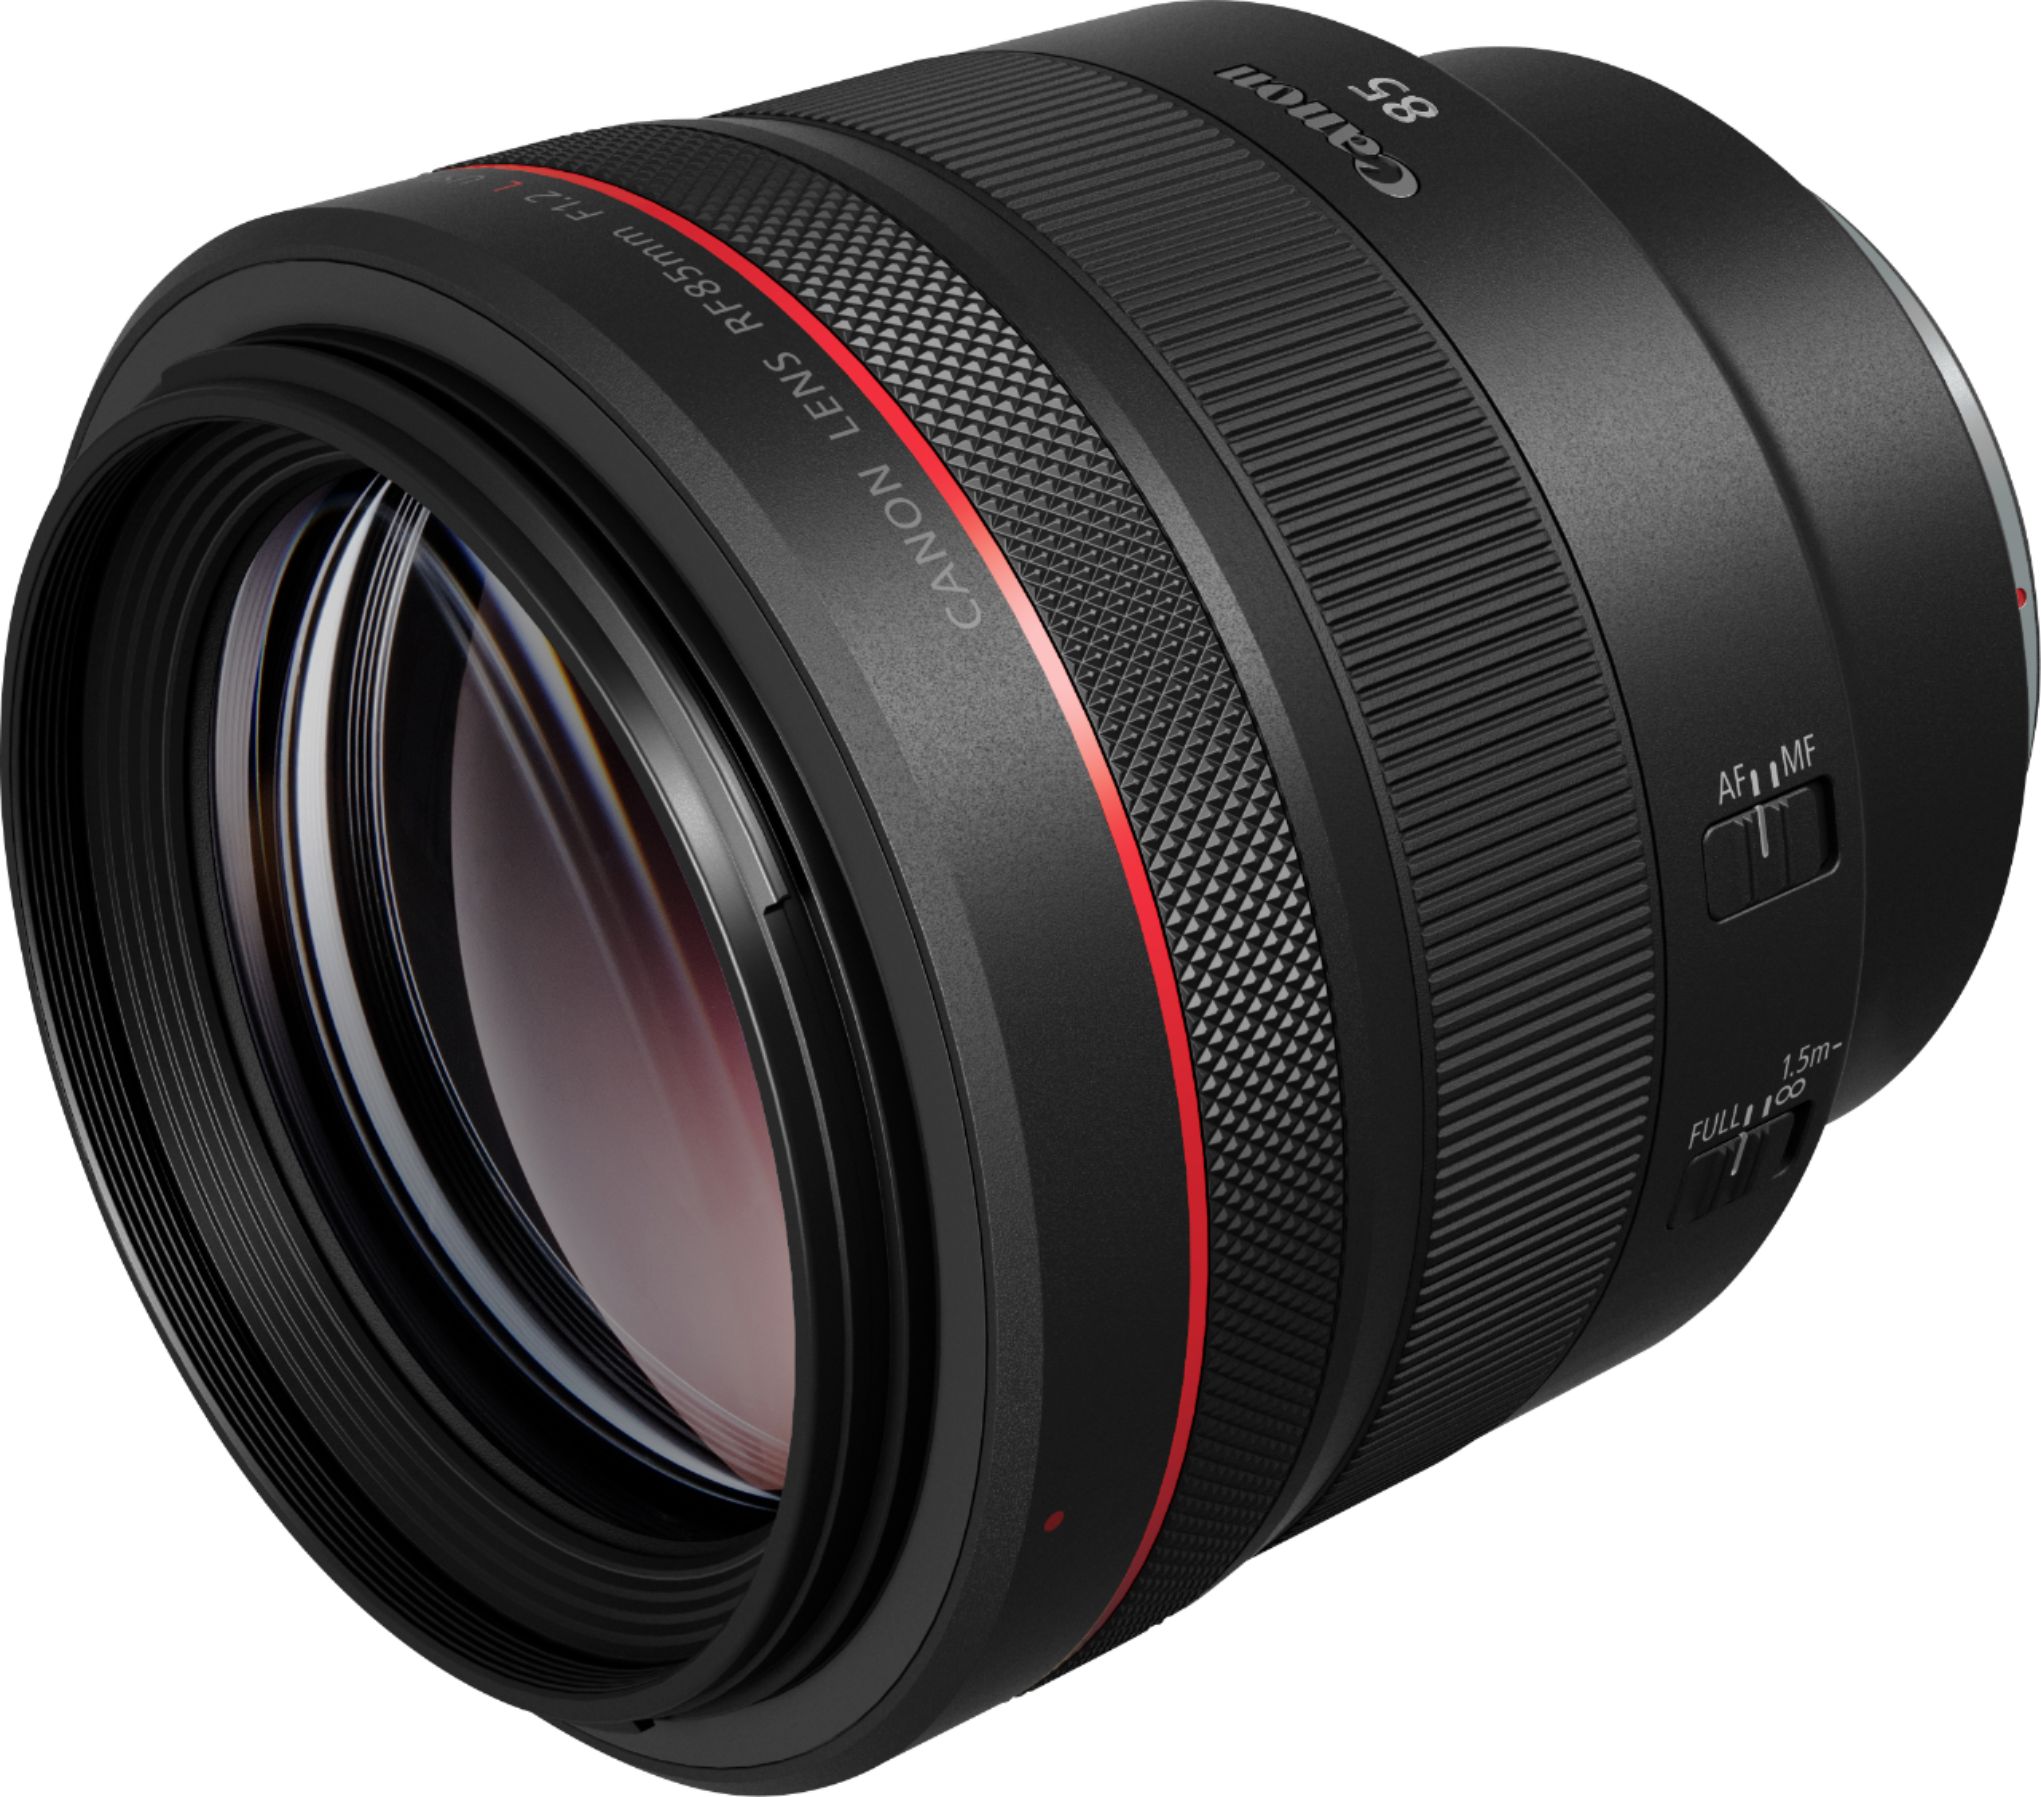 Angle View: Canon - RF85mm F1.2 L USM Mid-Telephoto Prime Lens for EOS R-Series Cameras - Black